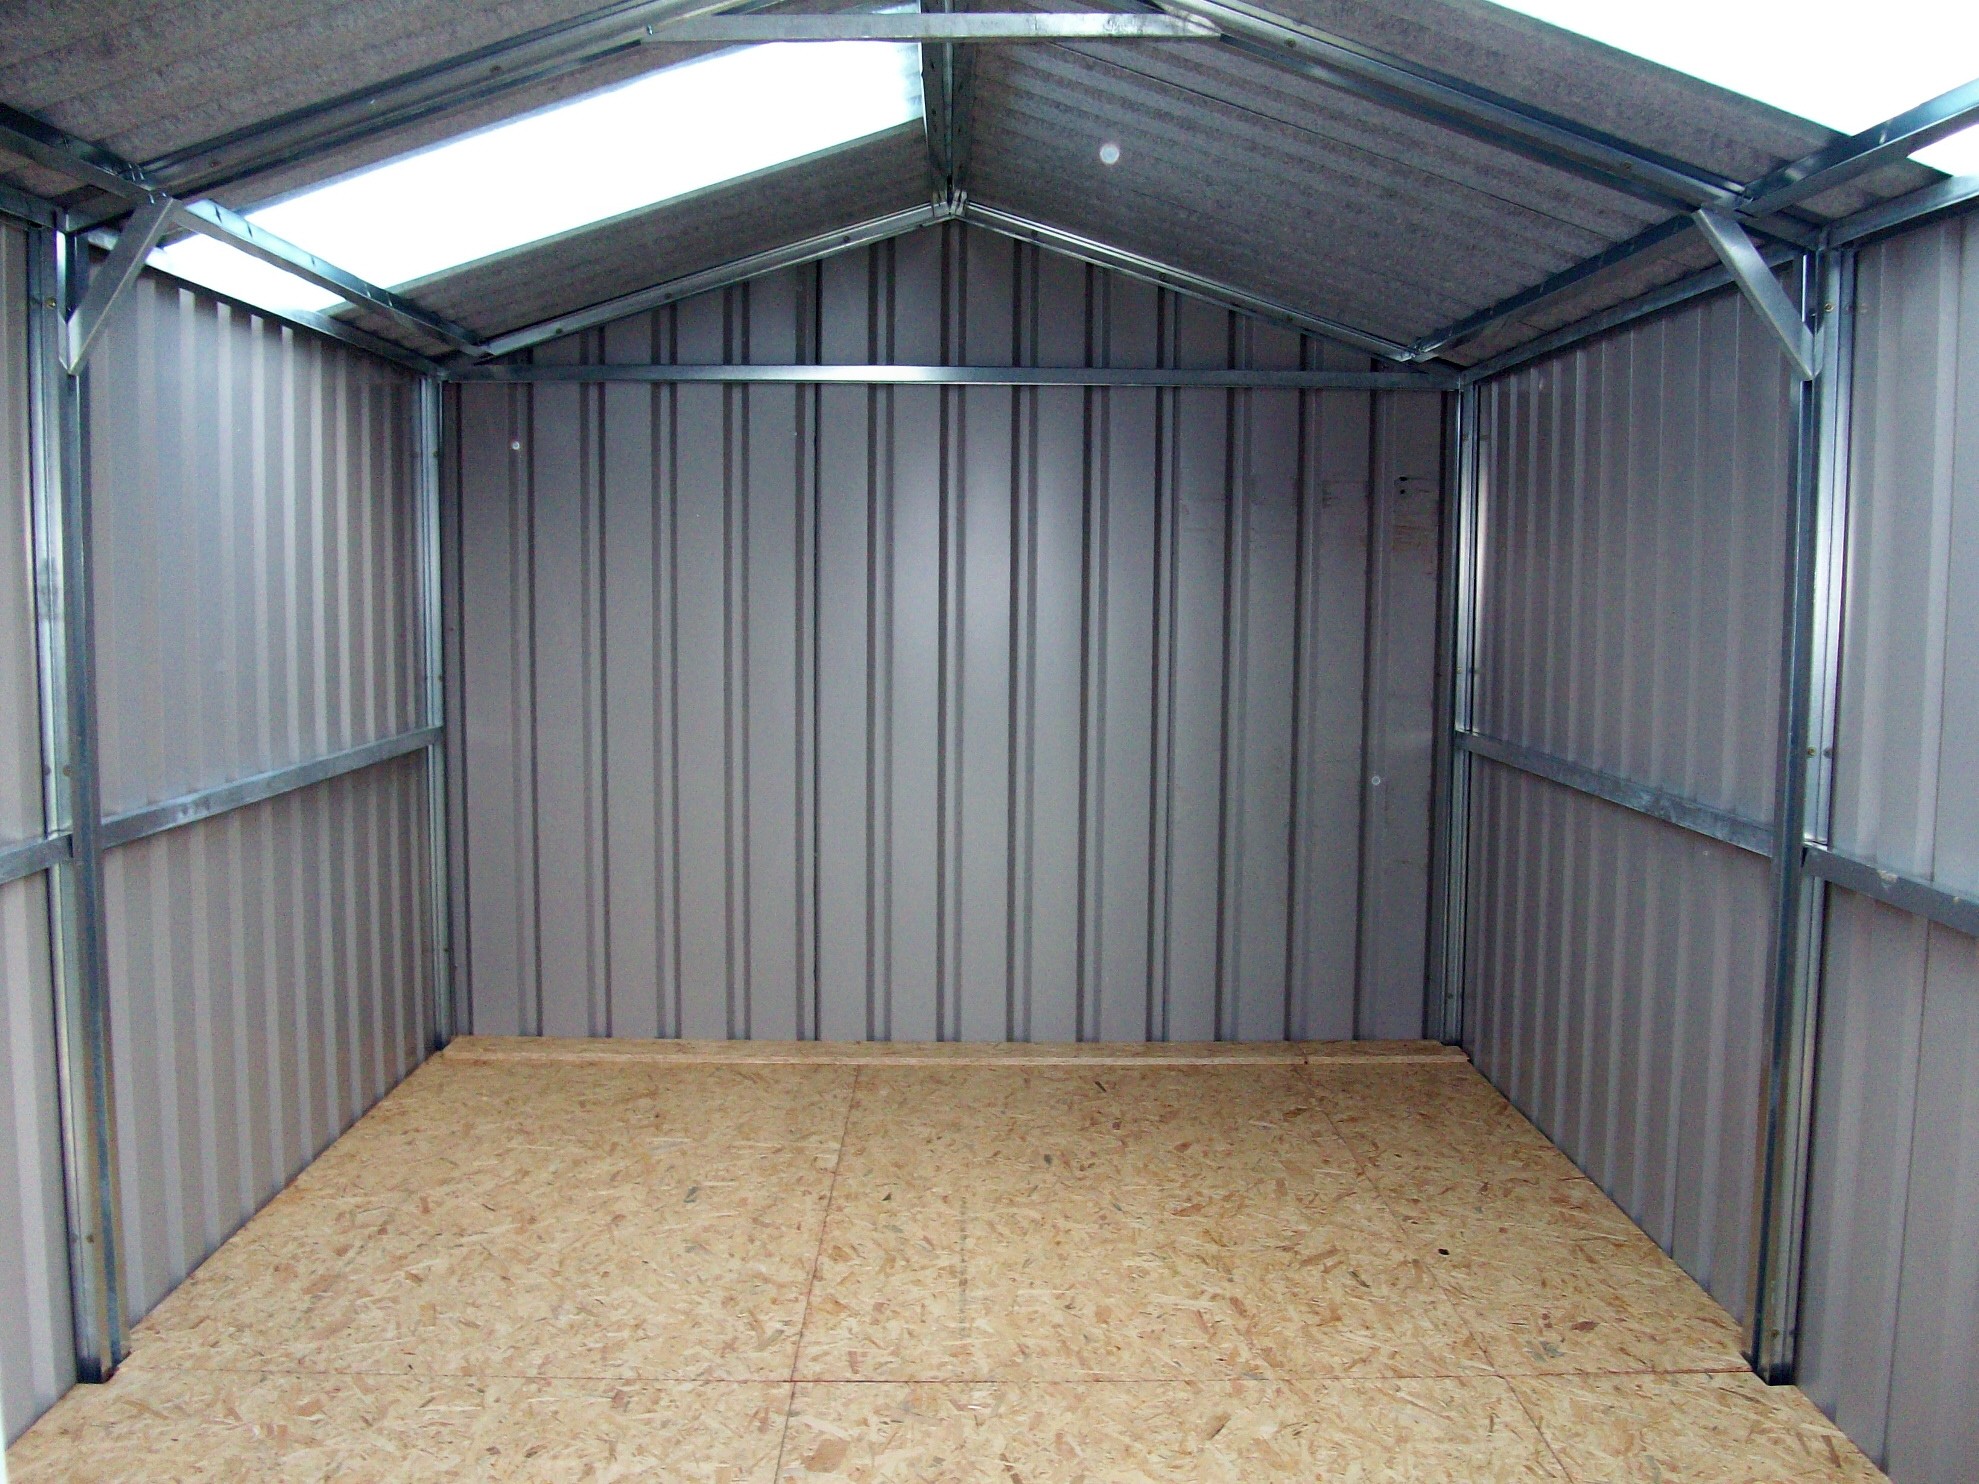 Building a Metal Shed - Is It a Good DYI Project 